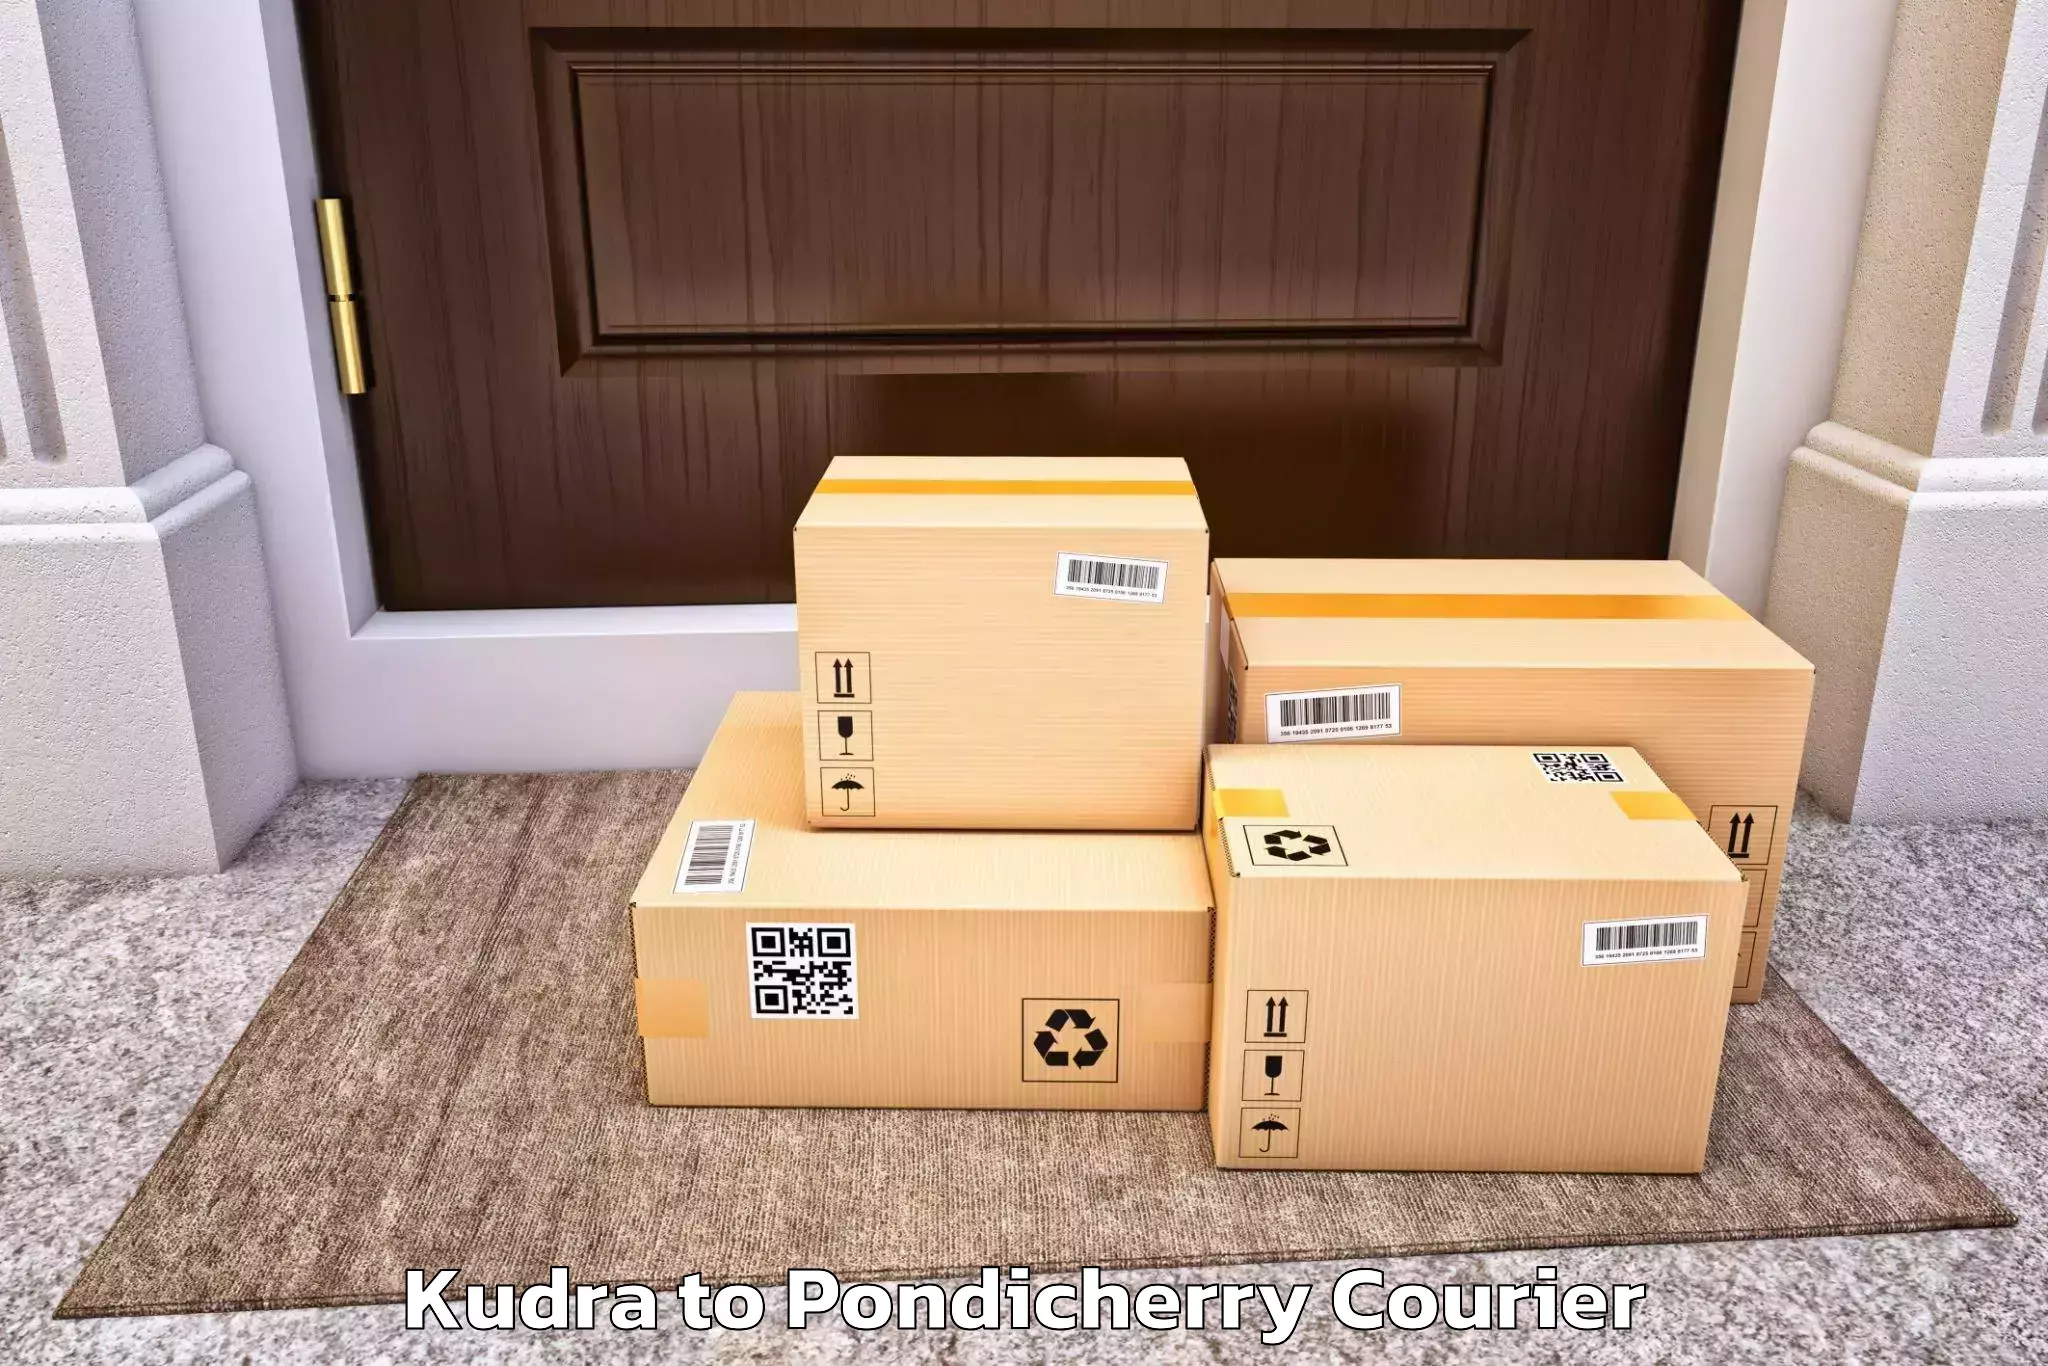 Moving and packing experts Kudra to Pondicherry